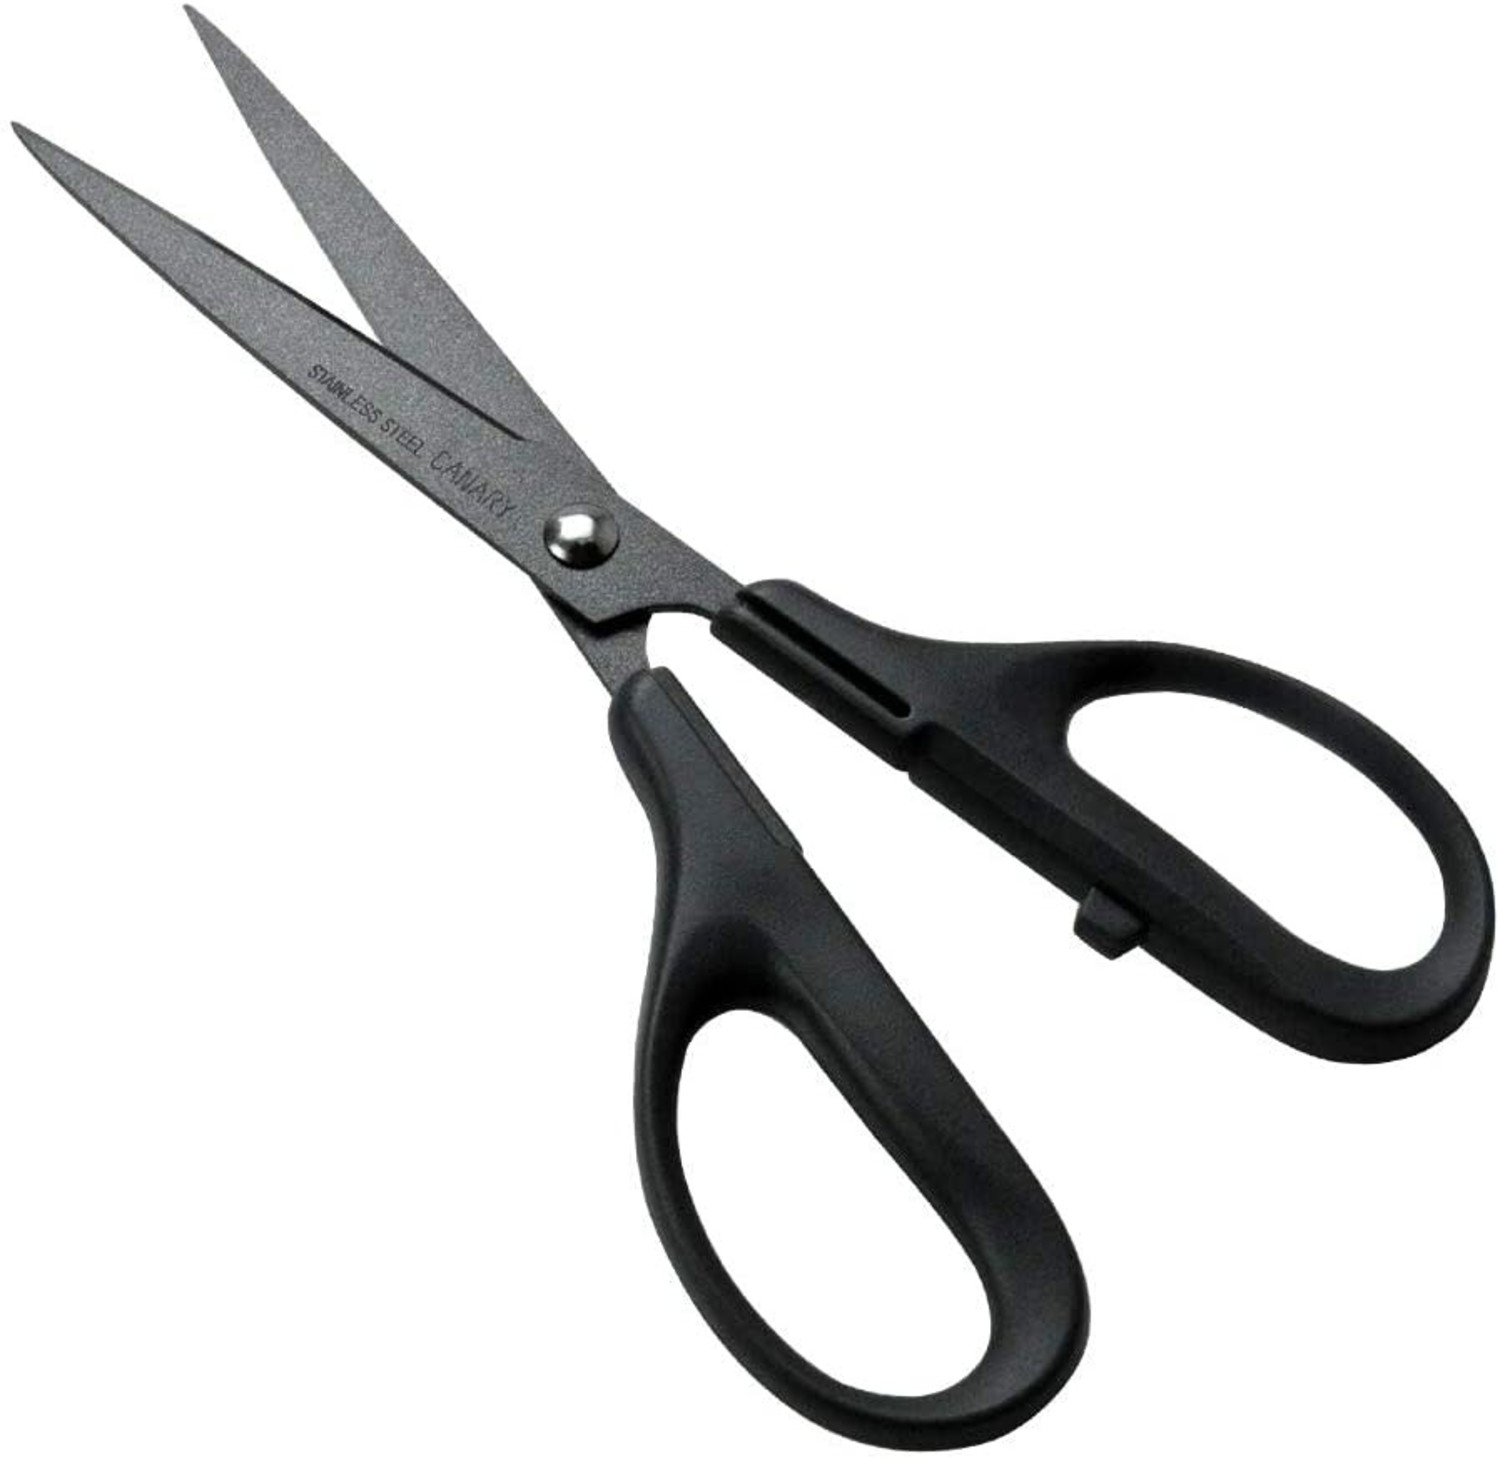 CANARY Spring Loaded Craft Scissors 7.2 [Long Blade], Made in JAPAN, Razor  Sharp Japanese Stainless Steel Blade, Black